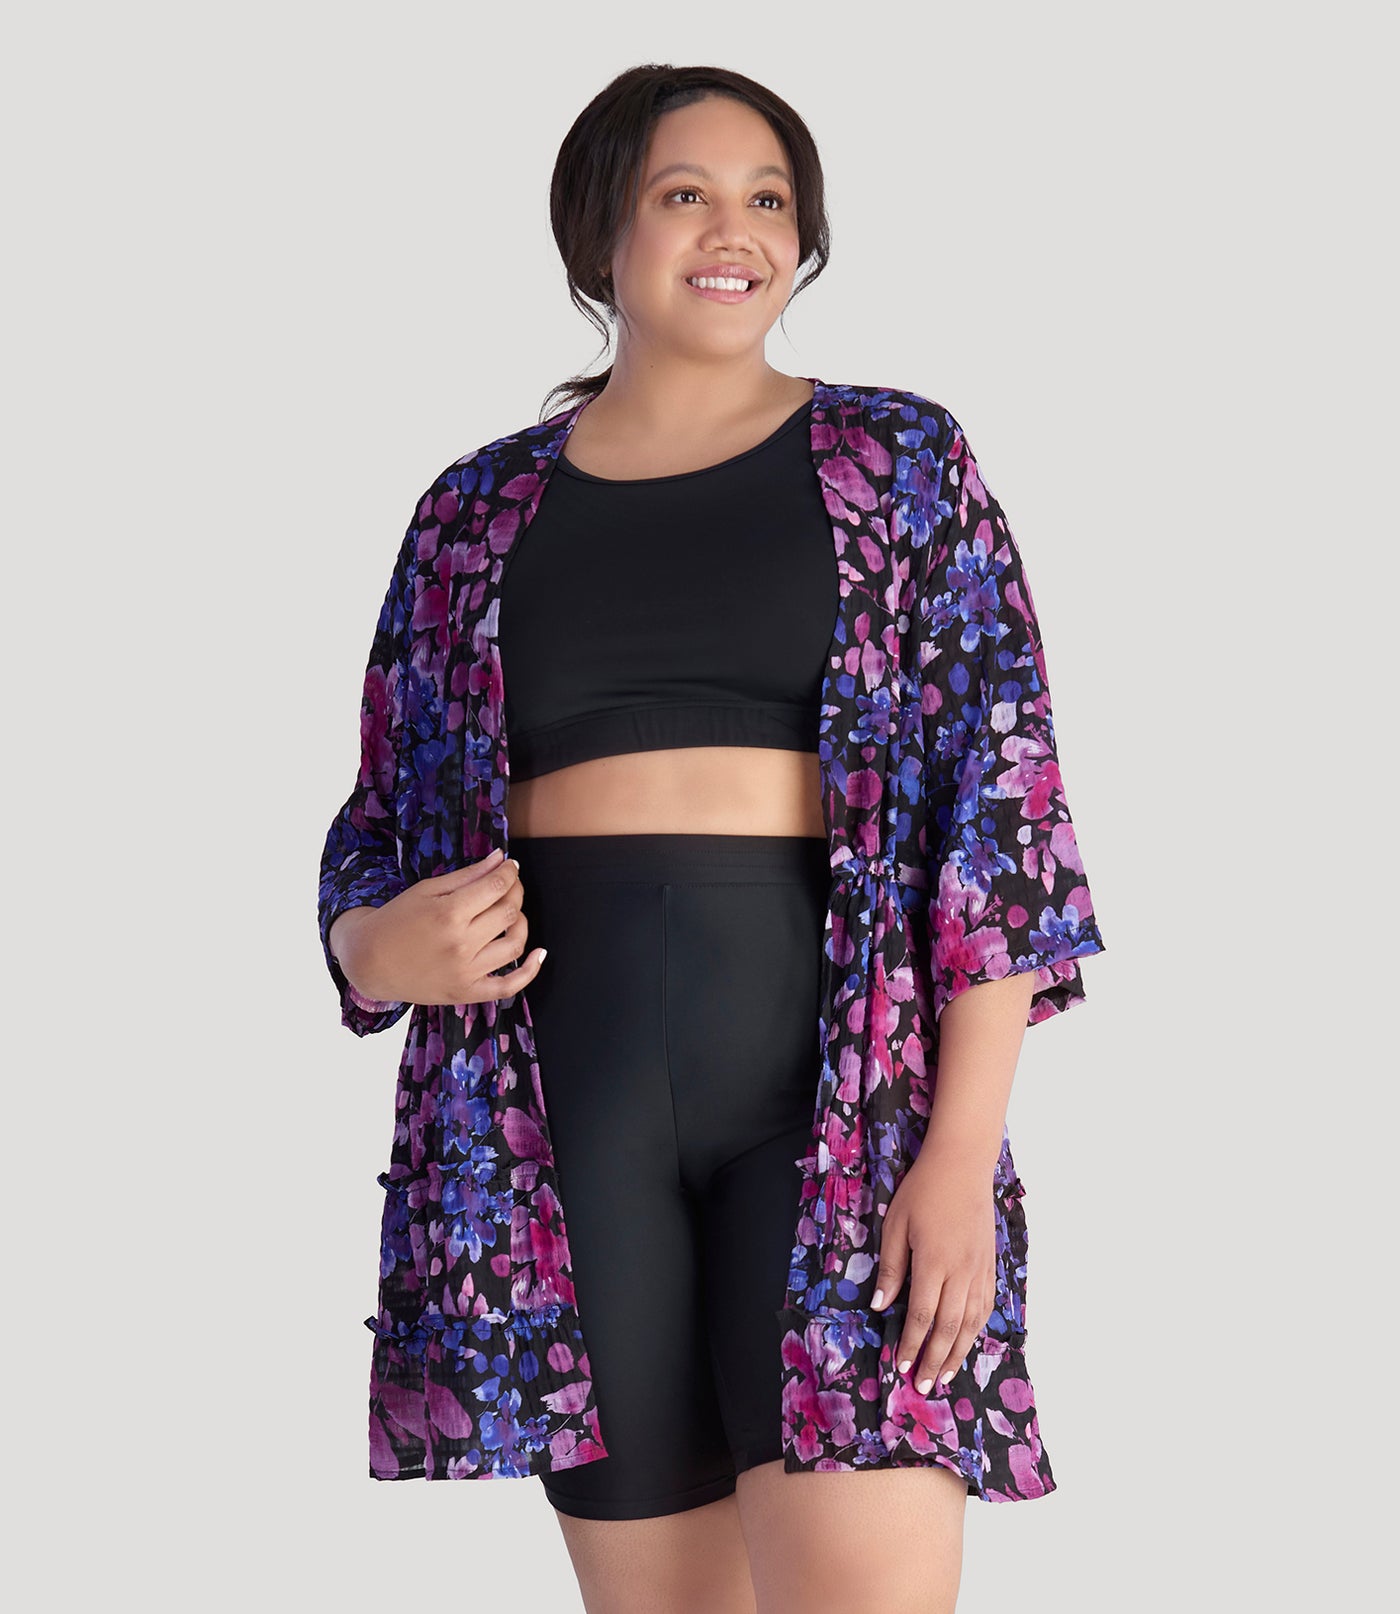  Plus size model, facing front, wearing JunoActive's BellaStyle Tie Front Tiered Cover-Up in floral elegance print.